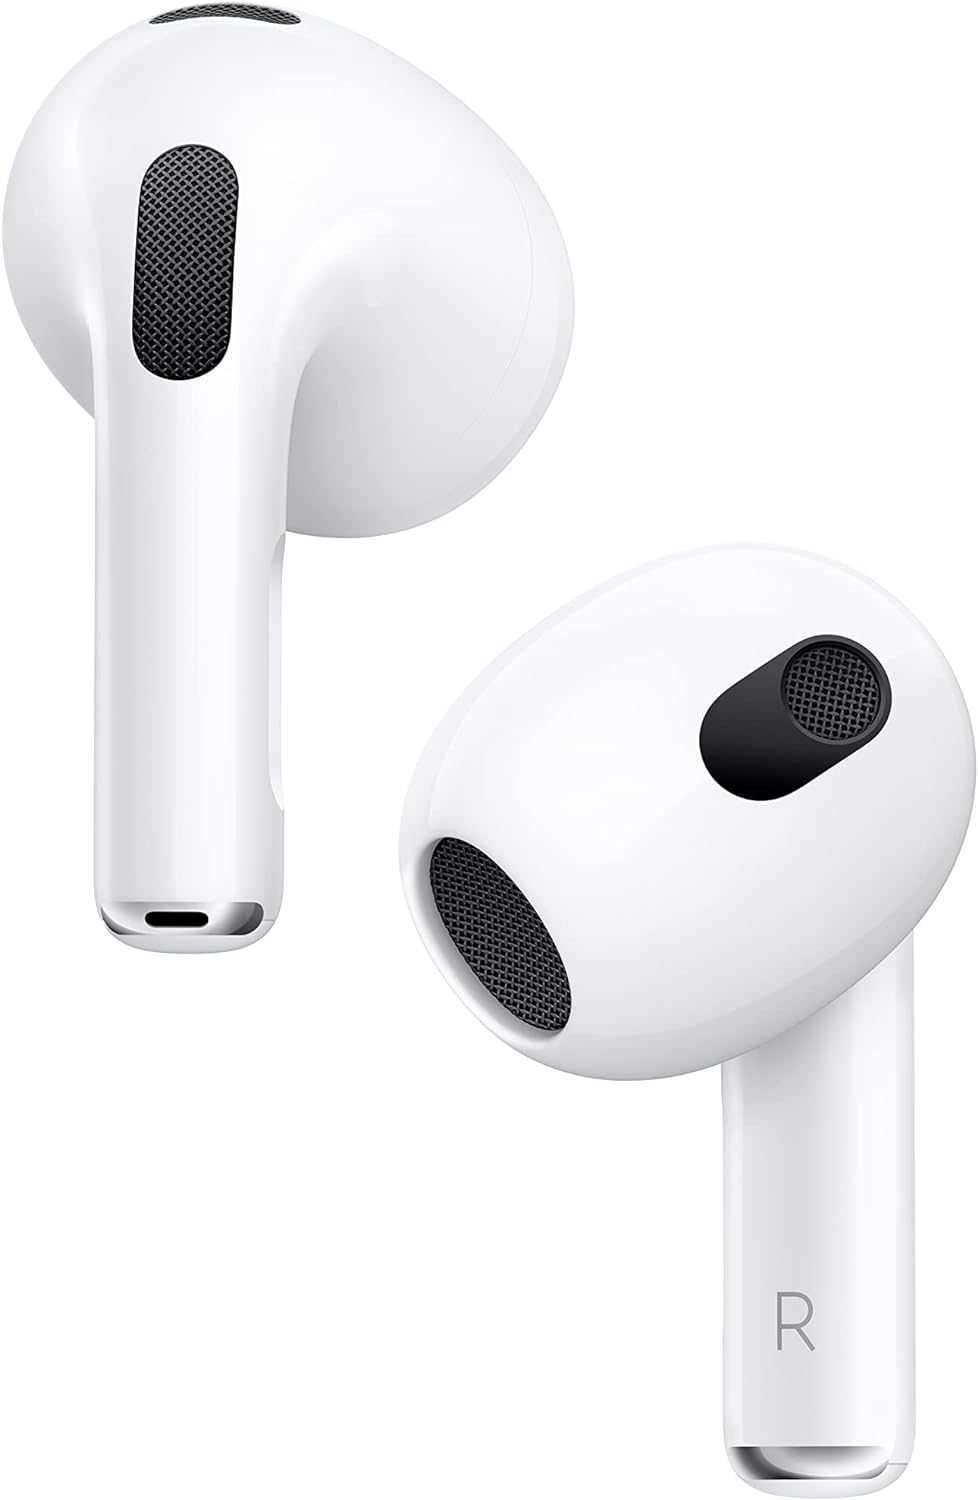 Apple AirPods (3rd Generation) Wireless Earbuds with MagSafe Charging Case: Detailed Review & Recommendations. Spatial Audio, Sweat and Water Resistant, Up to 30 Hours of Battery Life. Bluetooth Headphones for iPhone